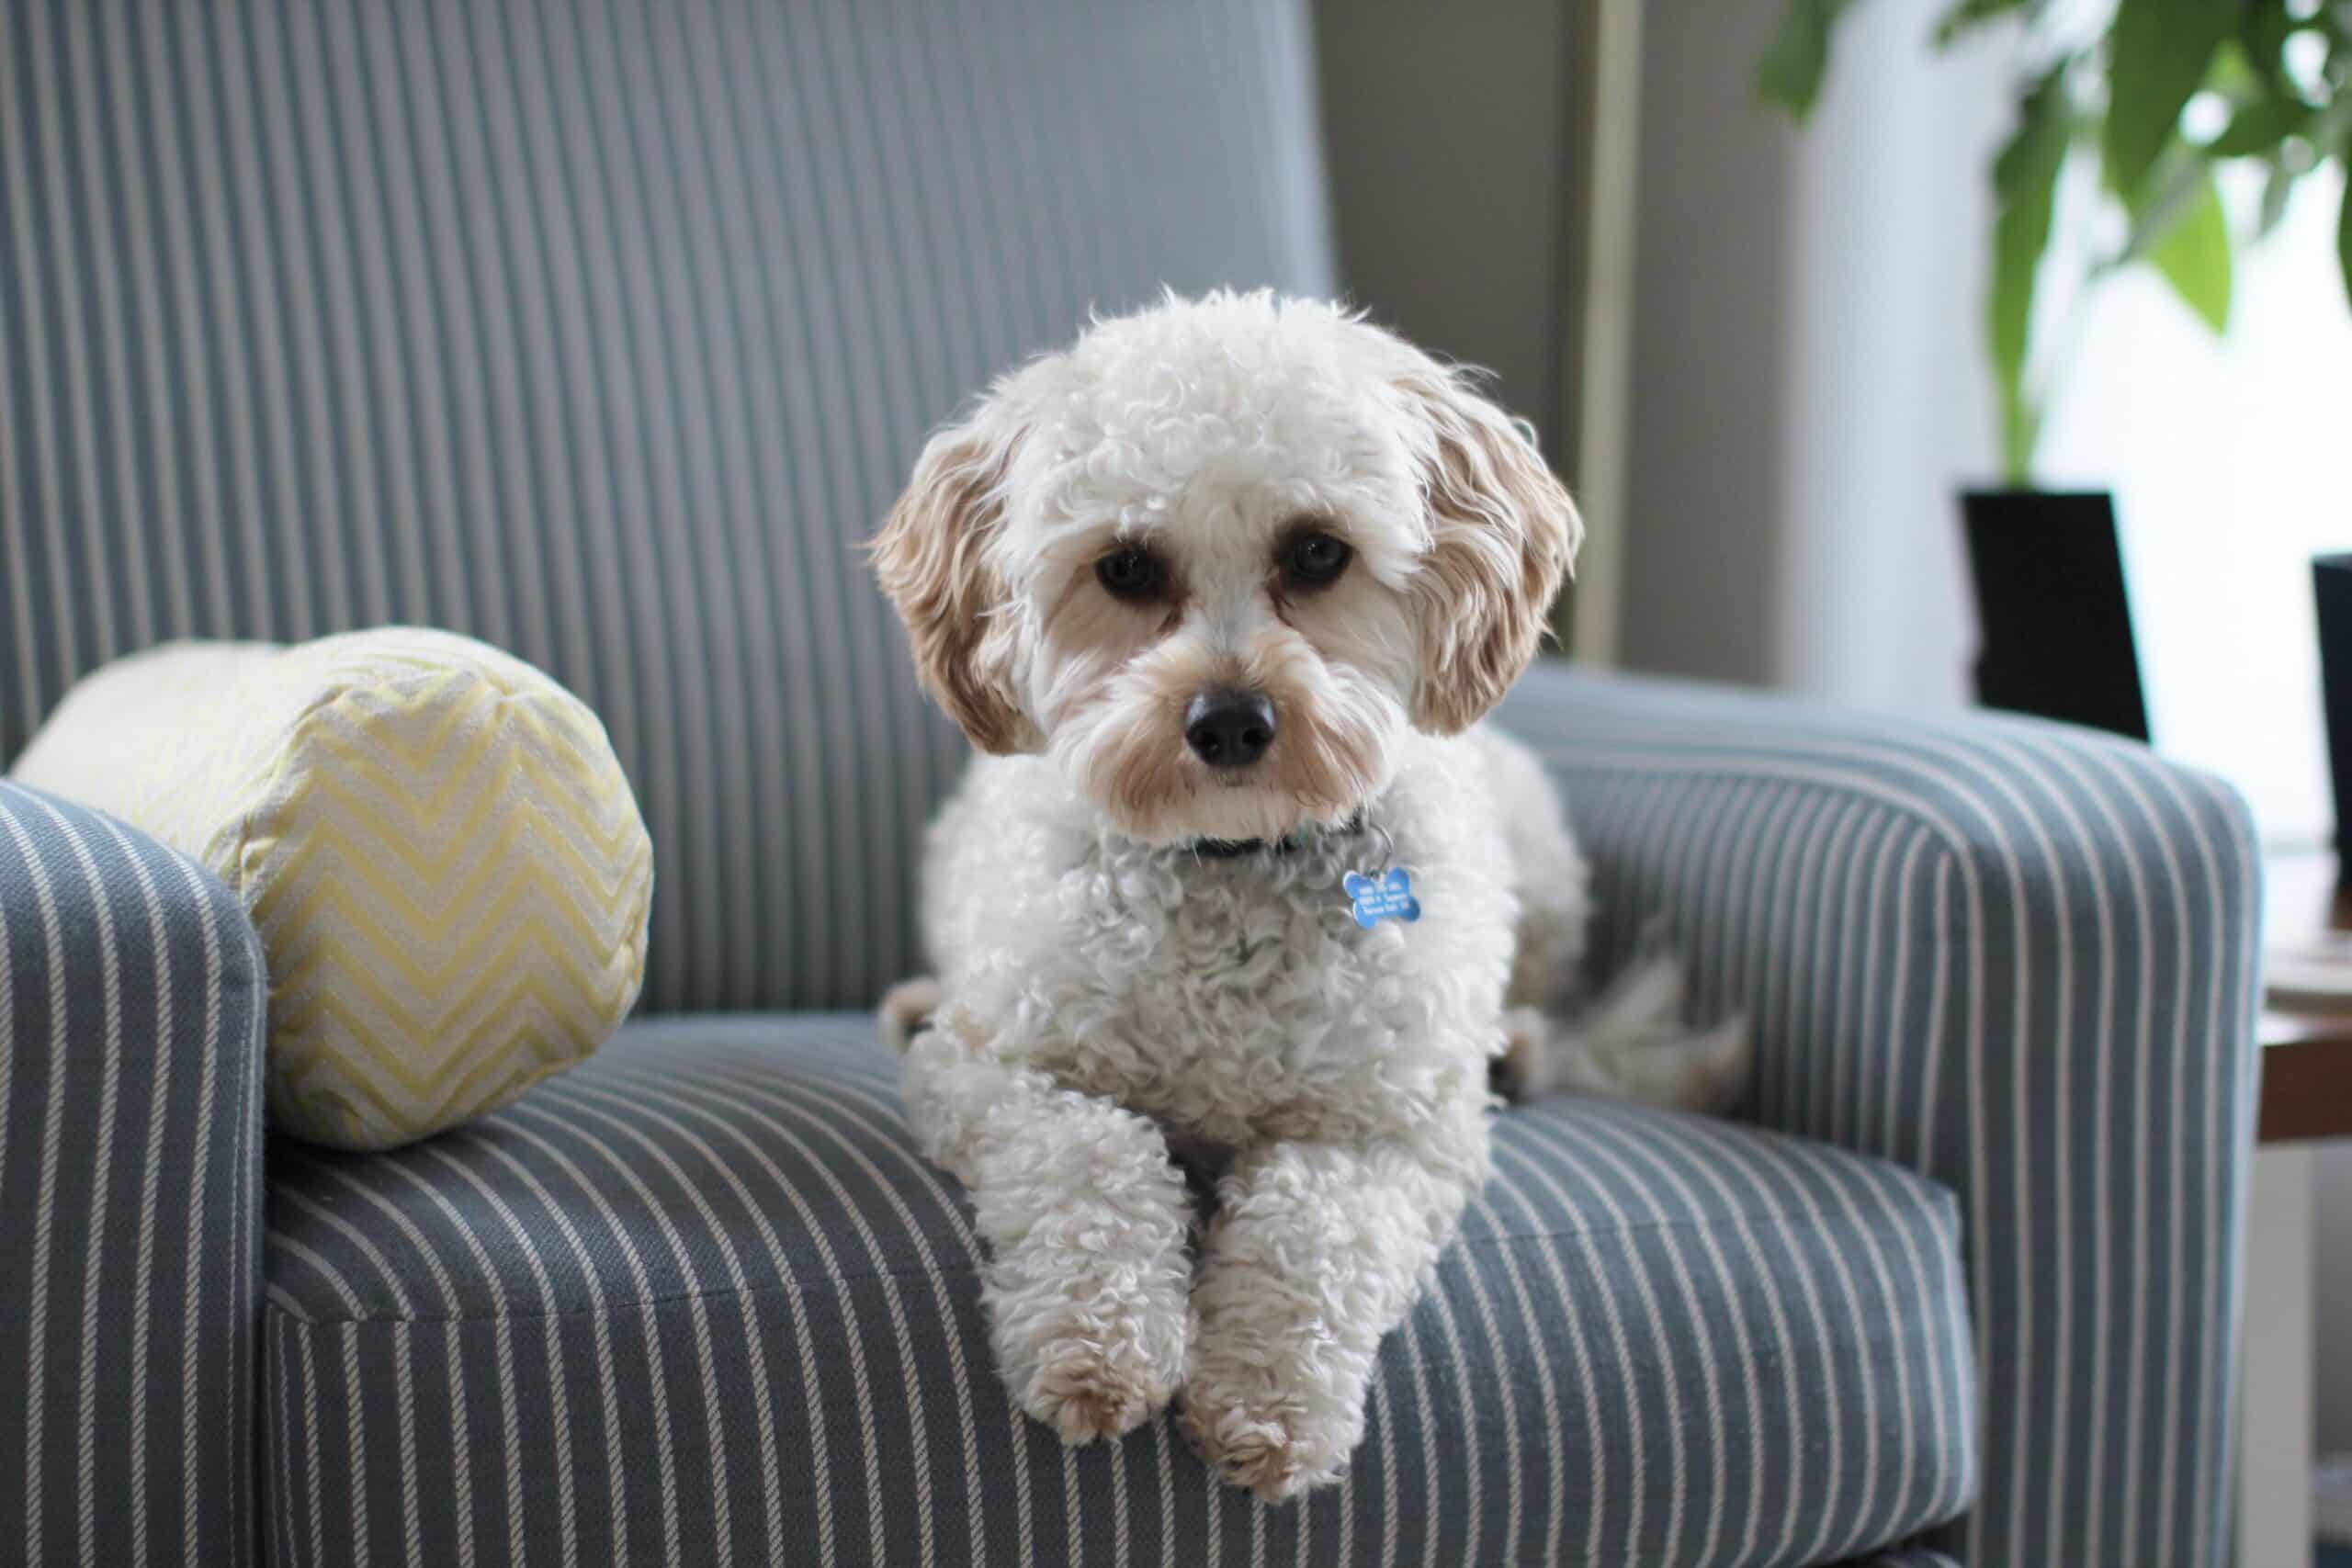 Becoming a pet sitter: A picture of a small white dog sat on a striped armchair, looking directly at the camera.